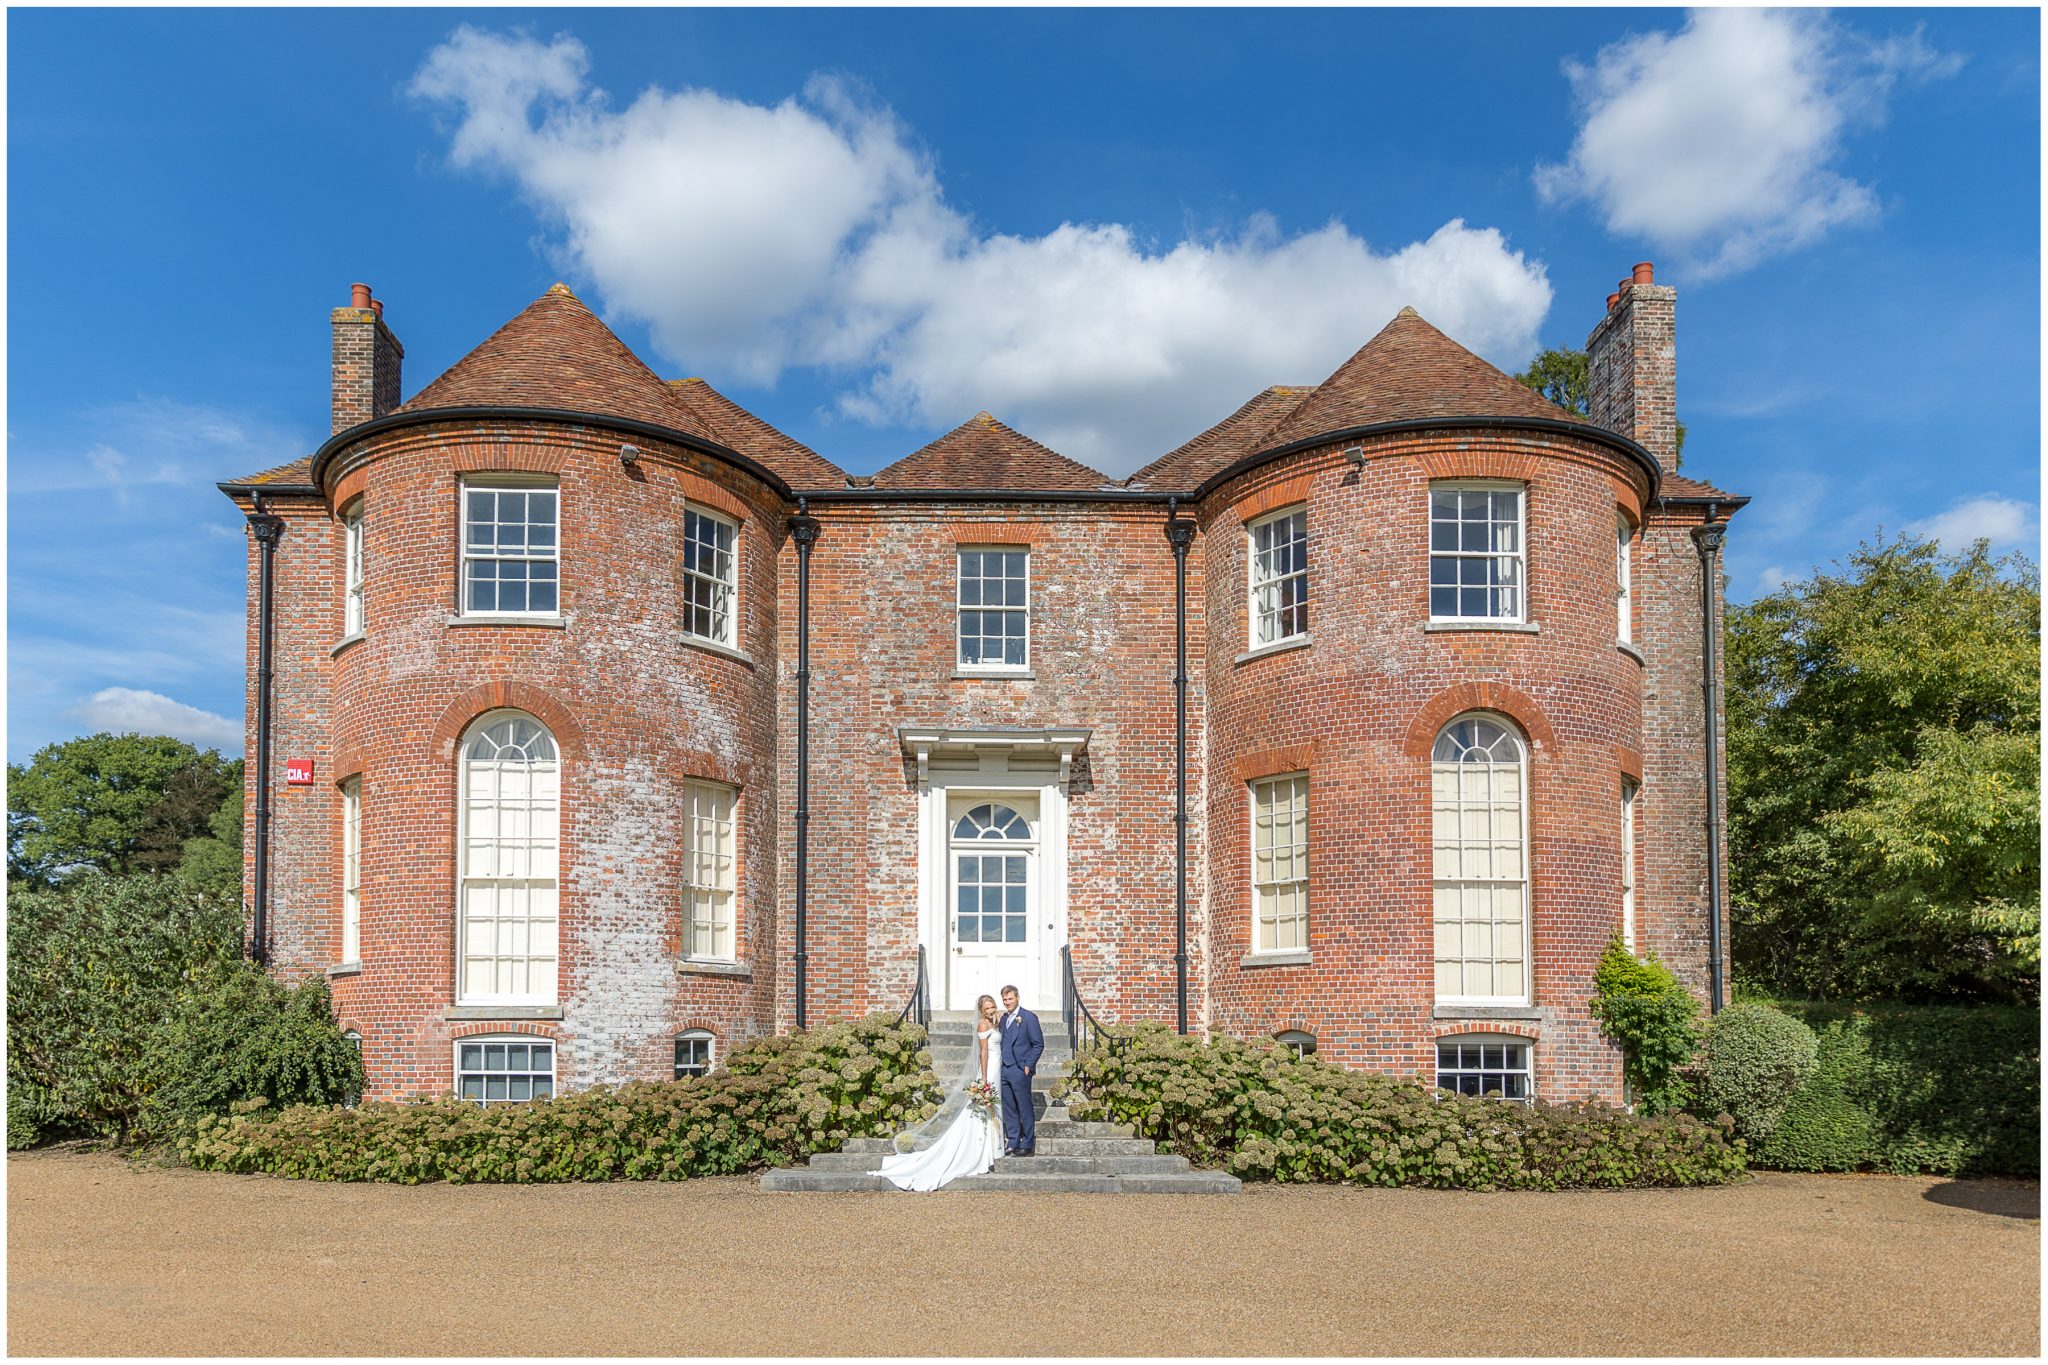 Bride and groom stood in front of main house at he Holywell Estate in Hampshire